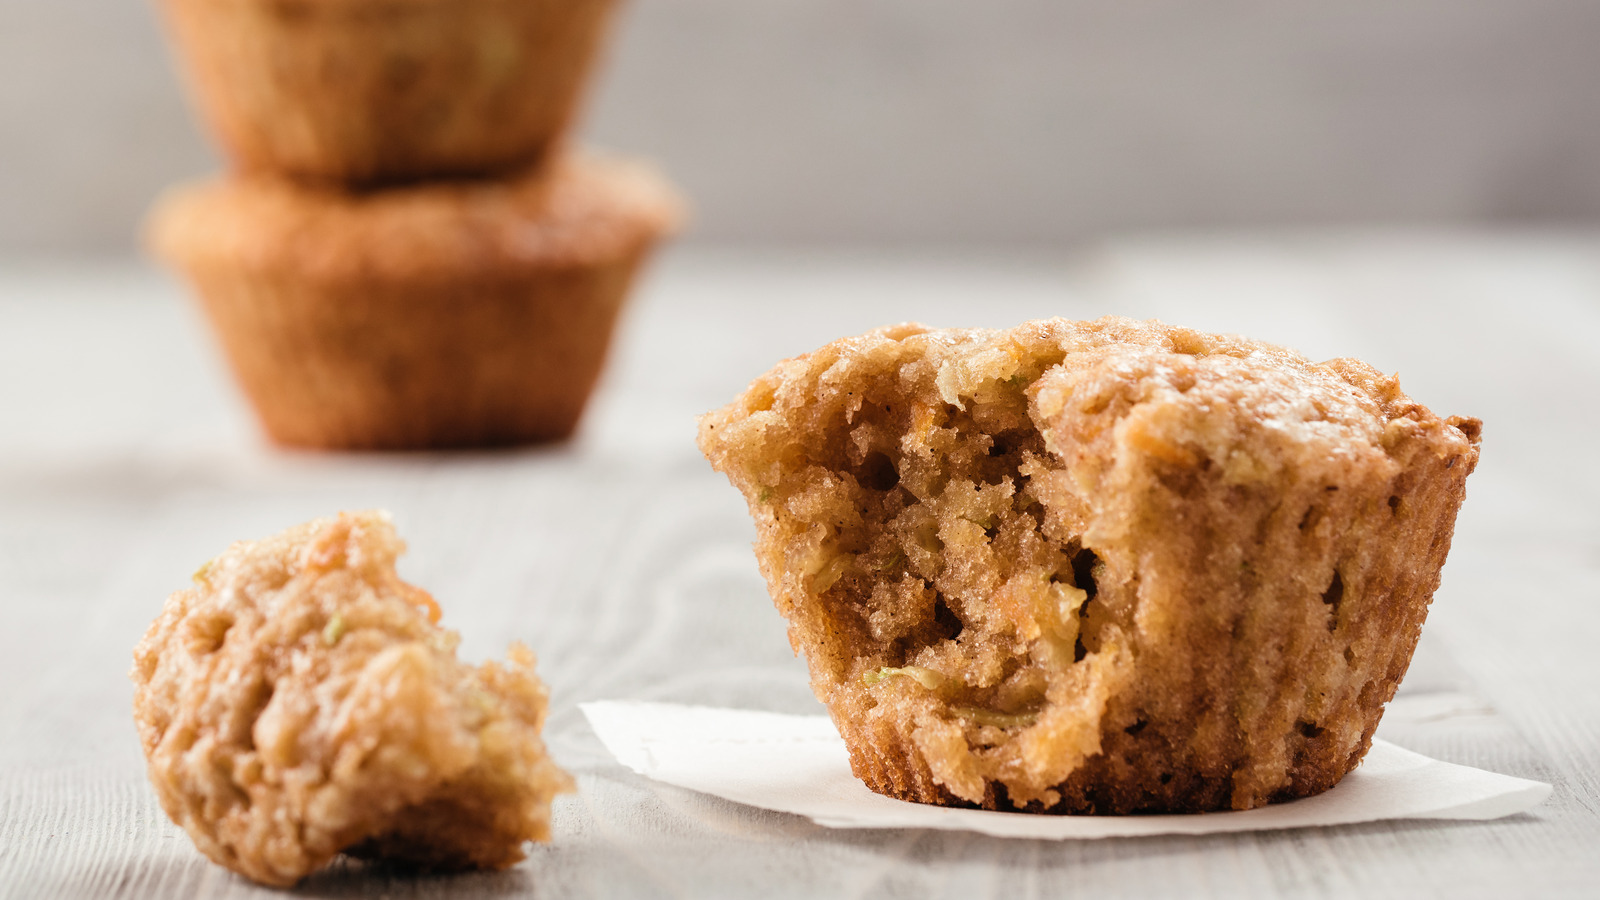 Ditch the Muffins and make MUFFIN TOPS instead!, Ditch the Muffins and  make MUFFIN TOPS instead!